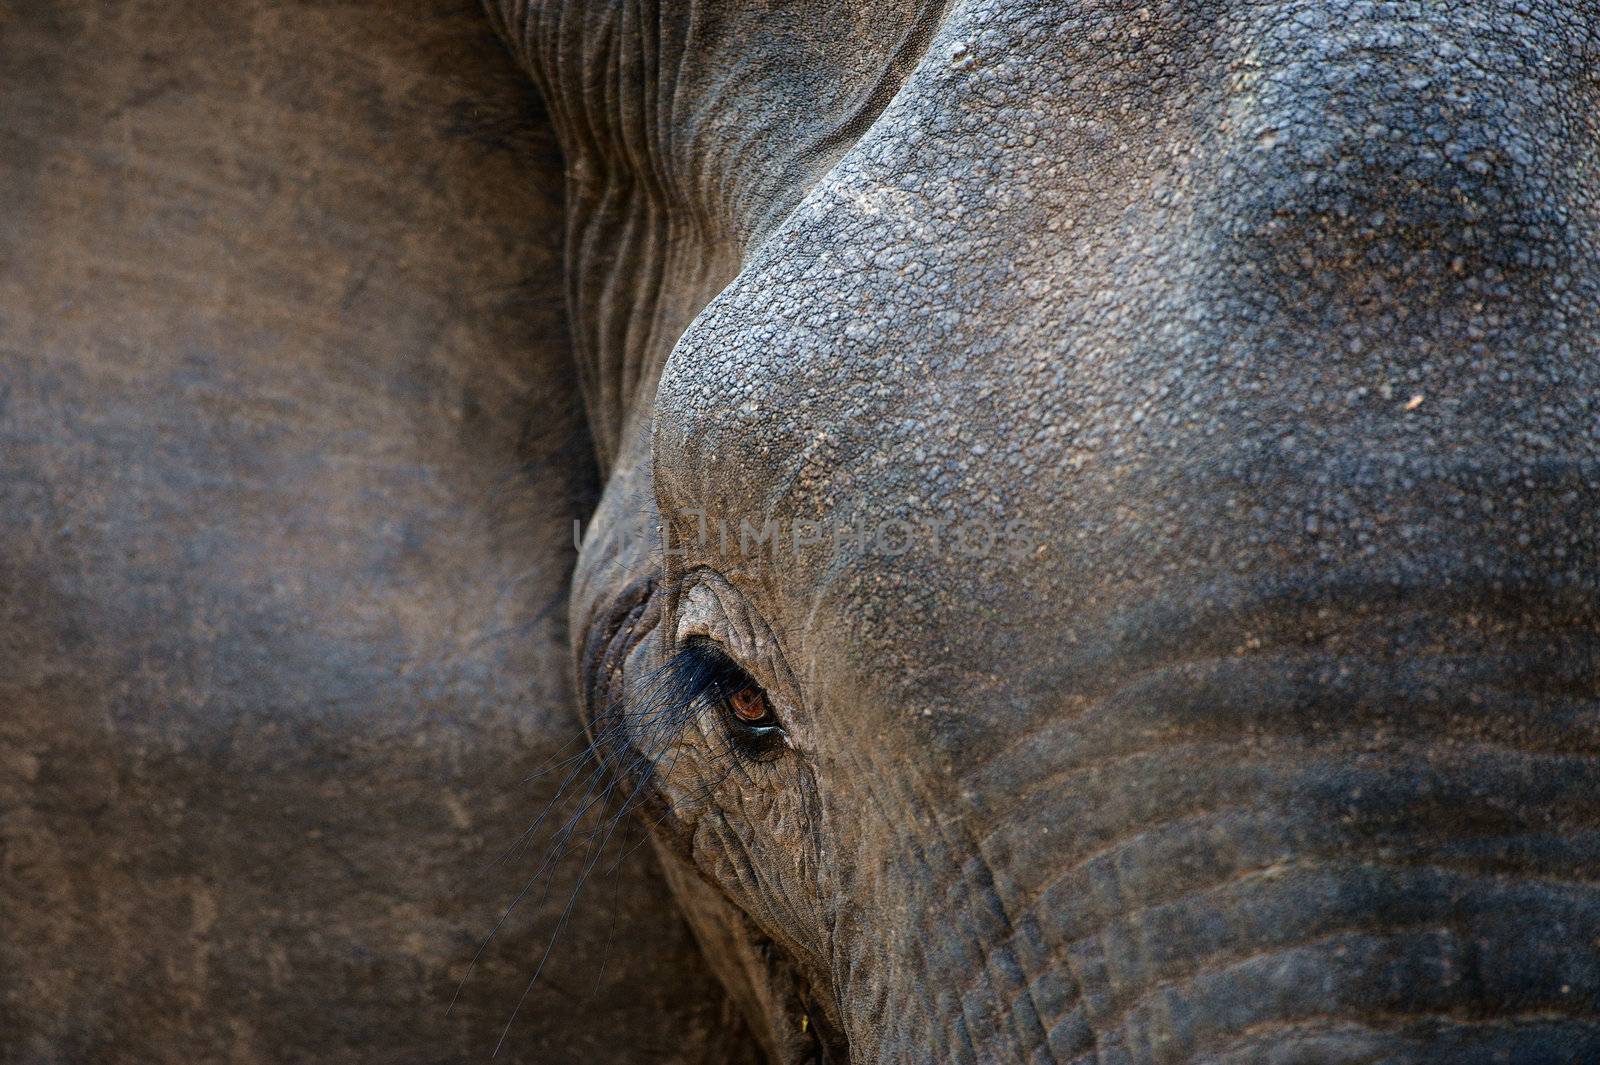 Eye of an elephant with eyelashes. by SURZ